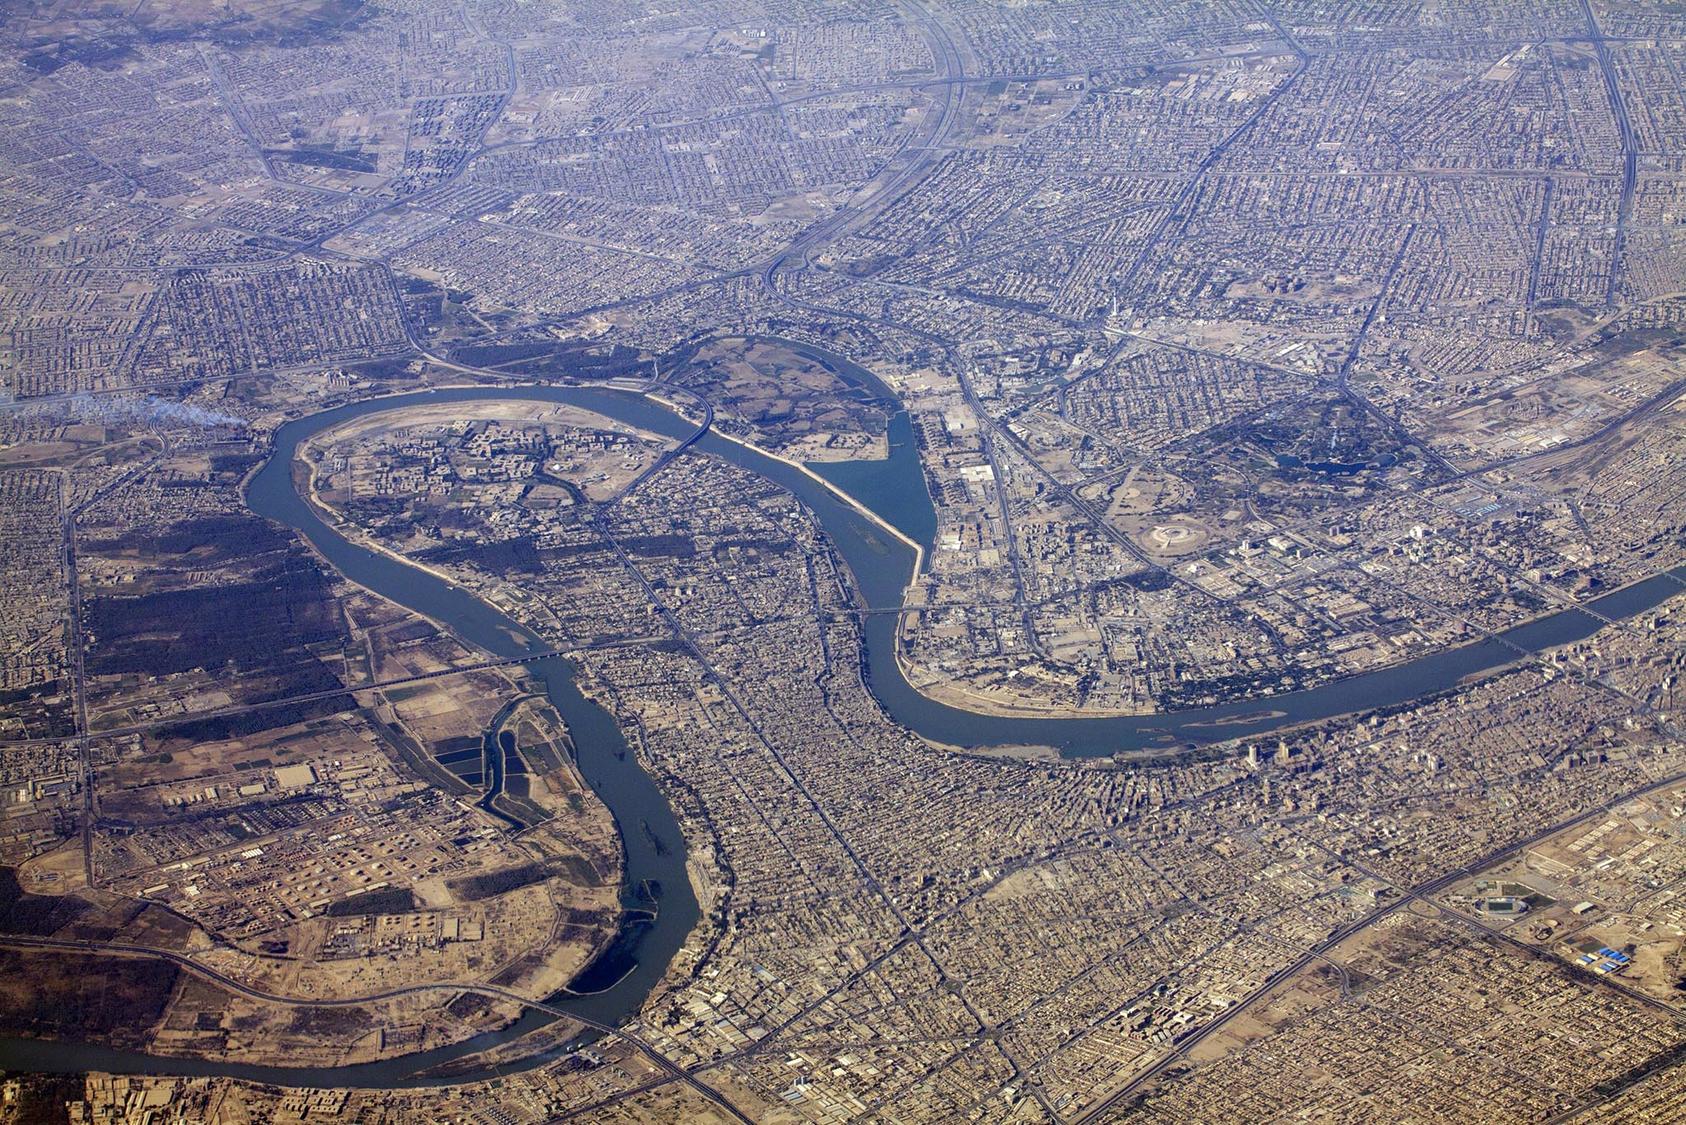 Aerial view of Baghdad and the Tigris River. (Andersen Oystein/iStock)